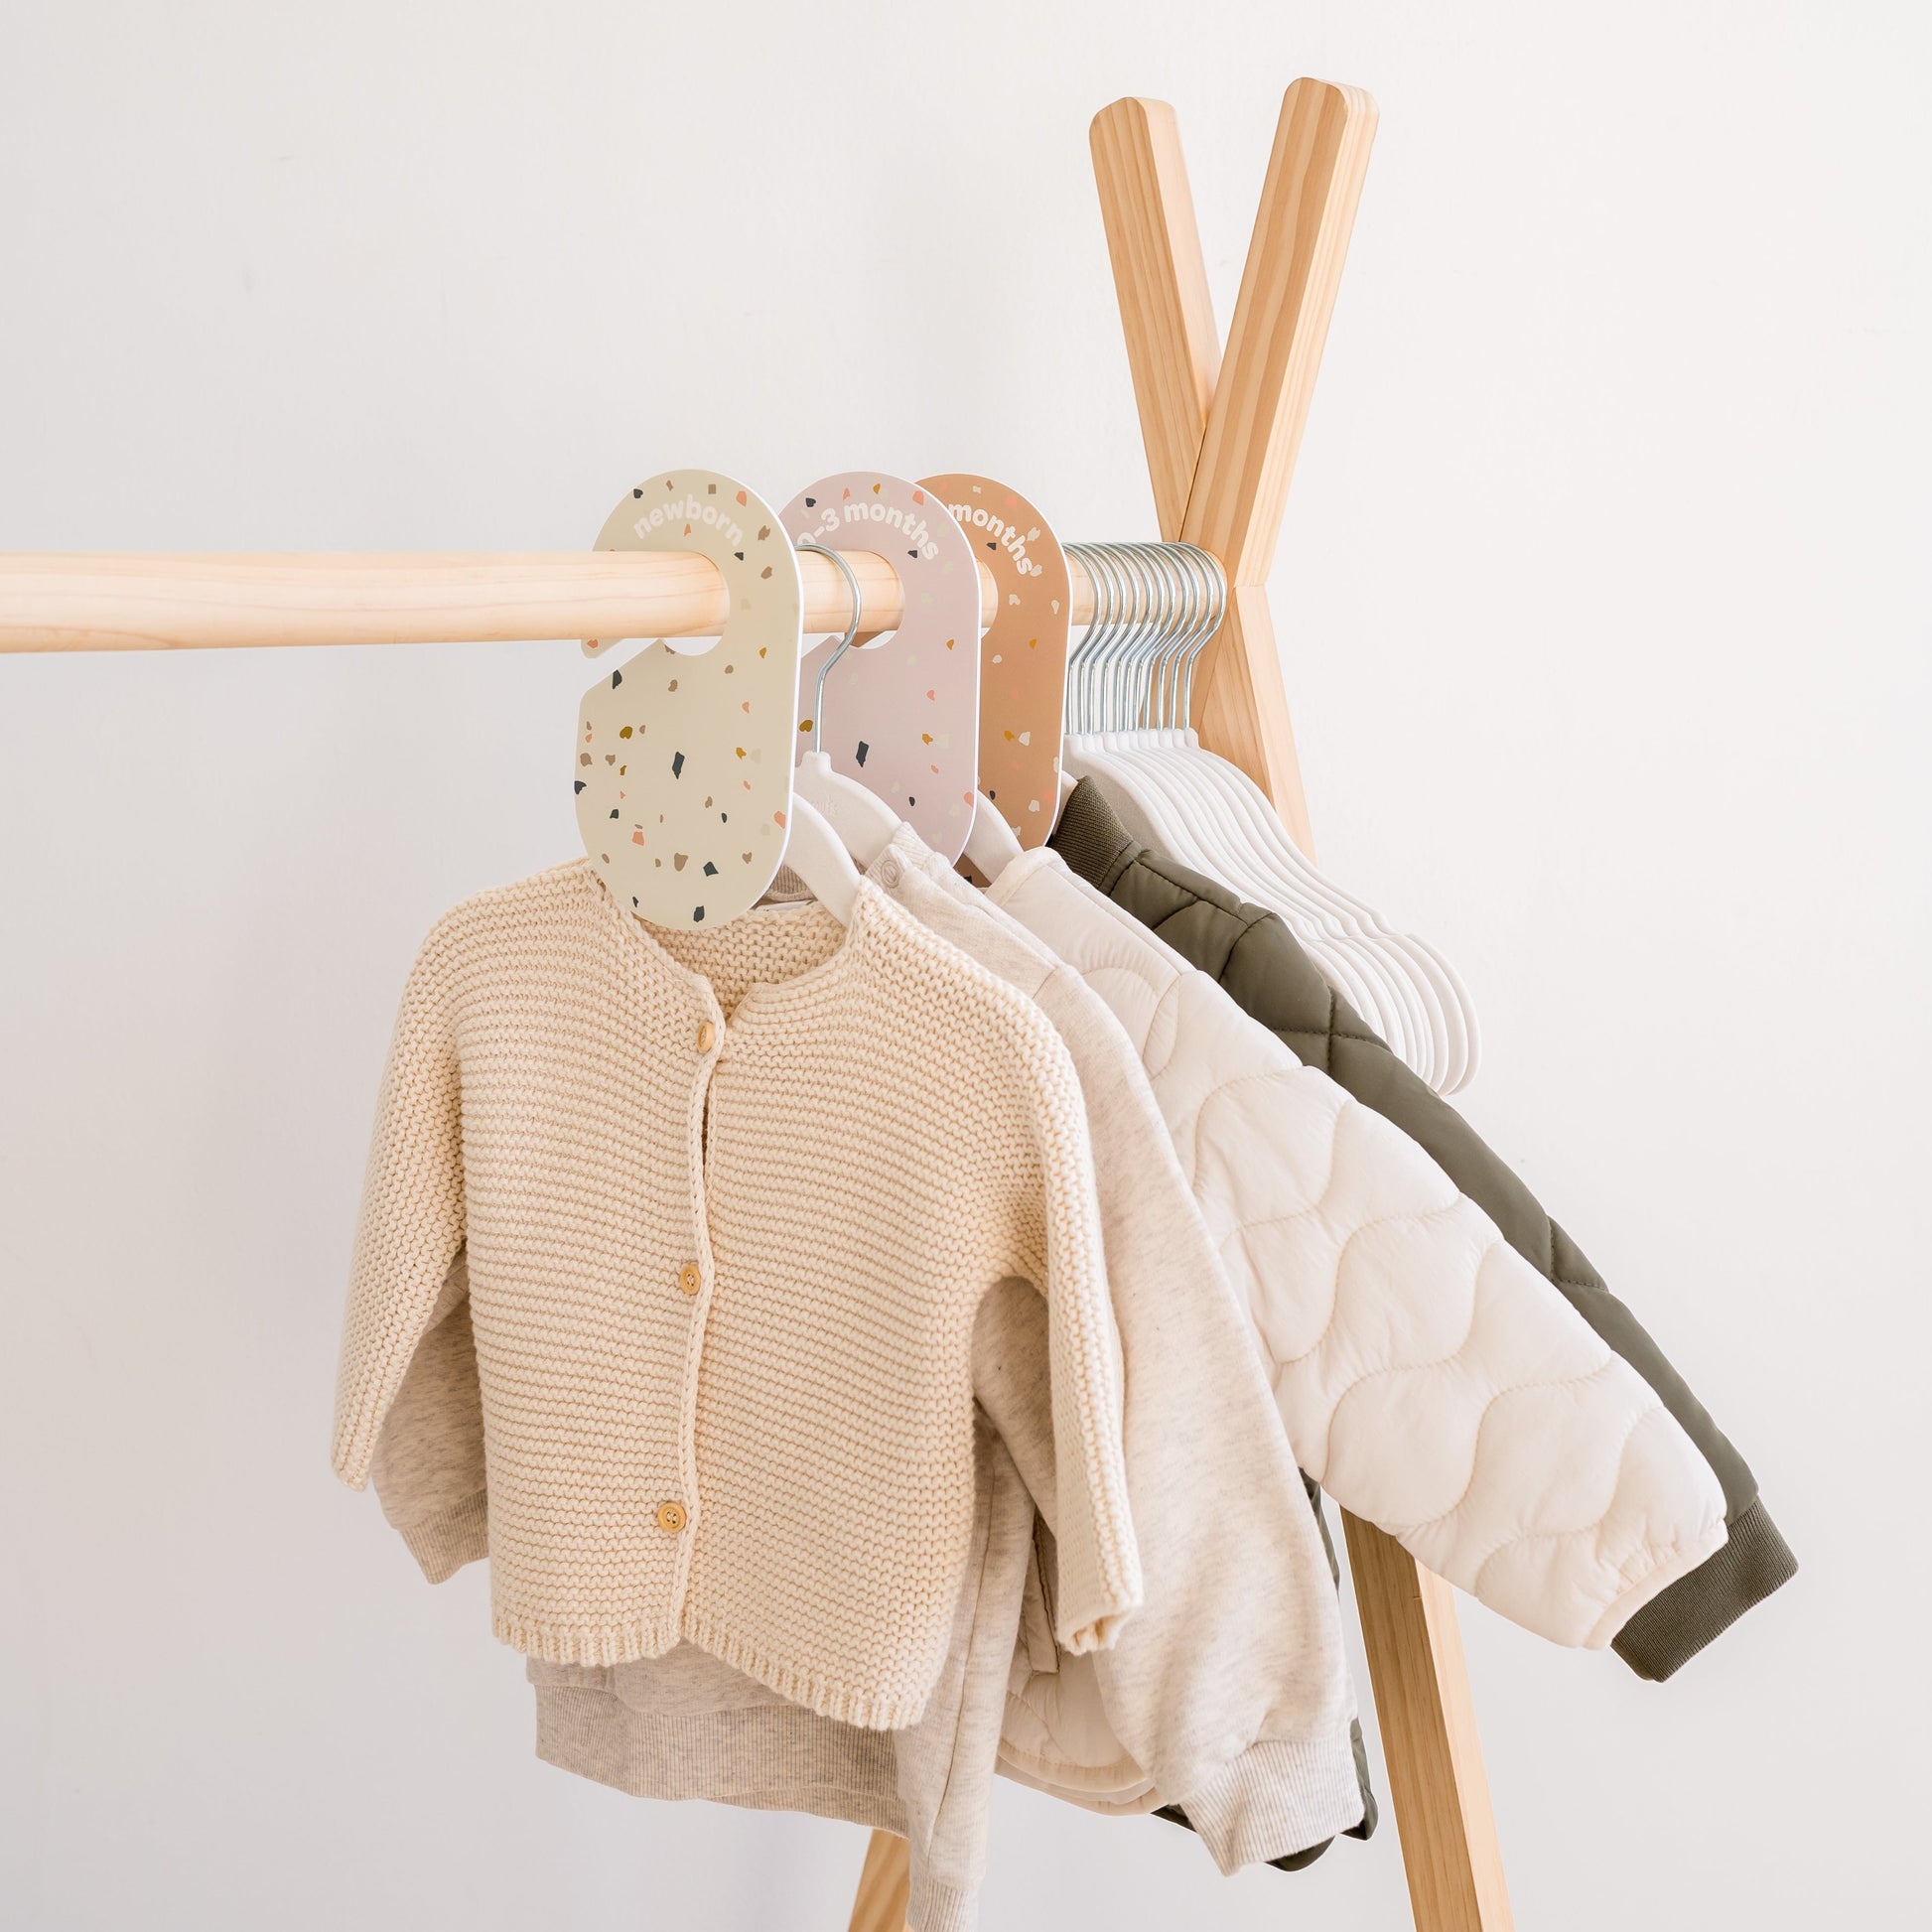 Wooden Clothing Rack With Shelves and Hangers Newborn Baby 